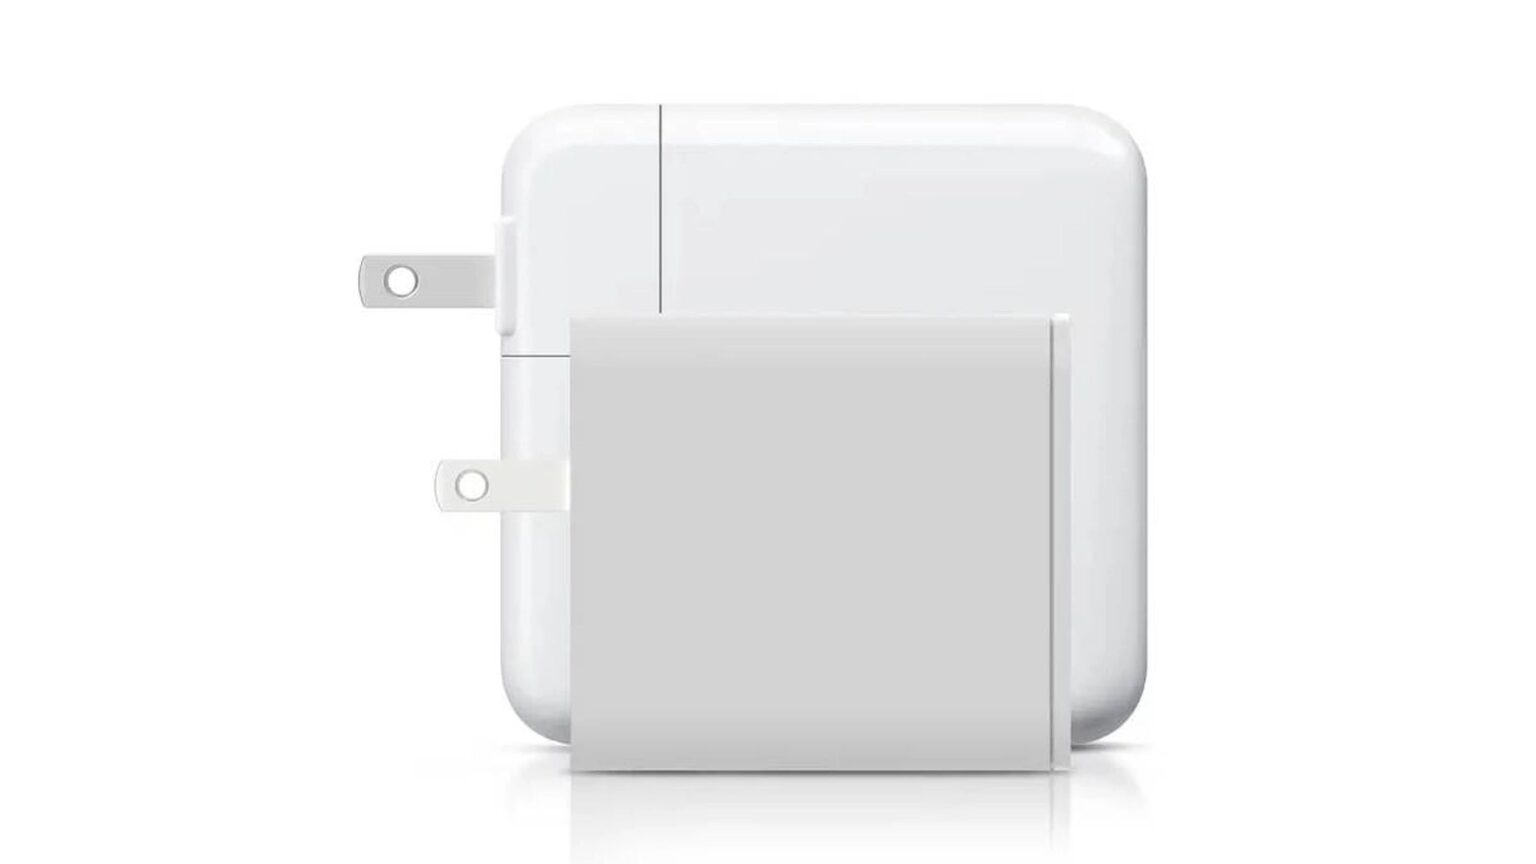 Compared to Apple's most similar charger, Mophie's 67W GaN unit is quite small.